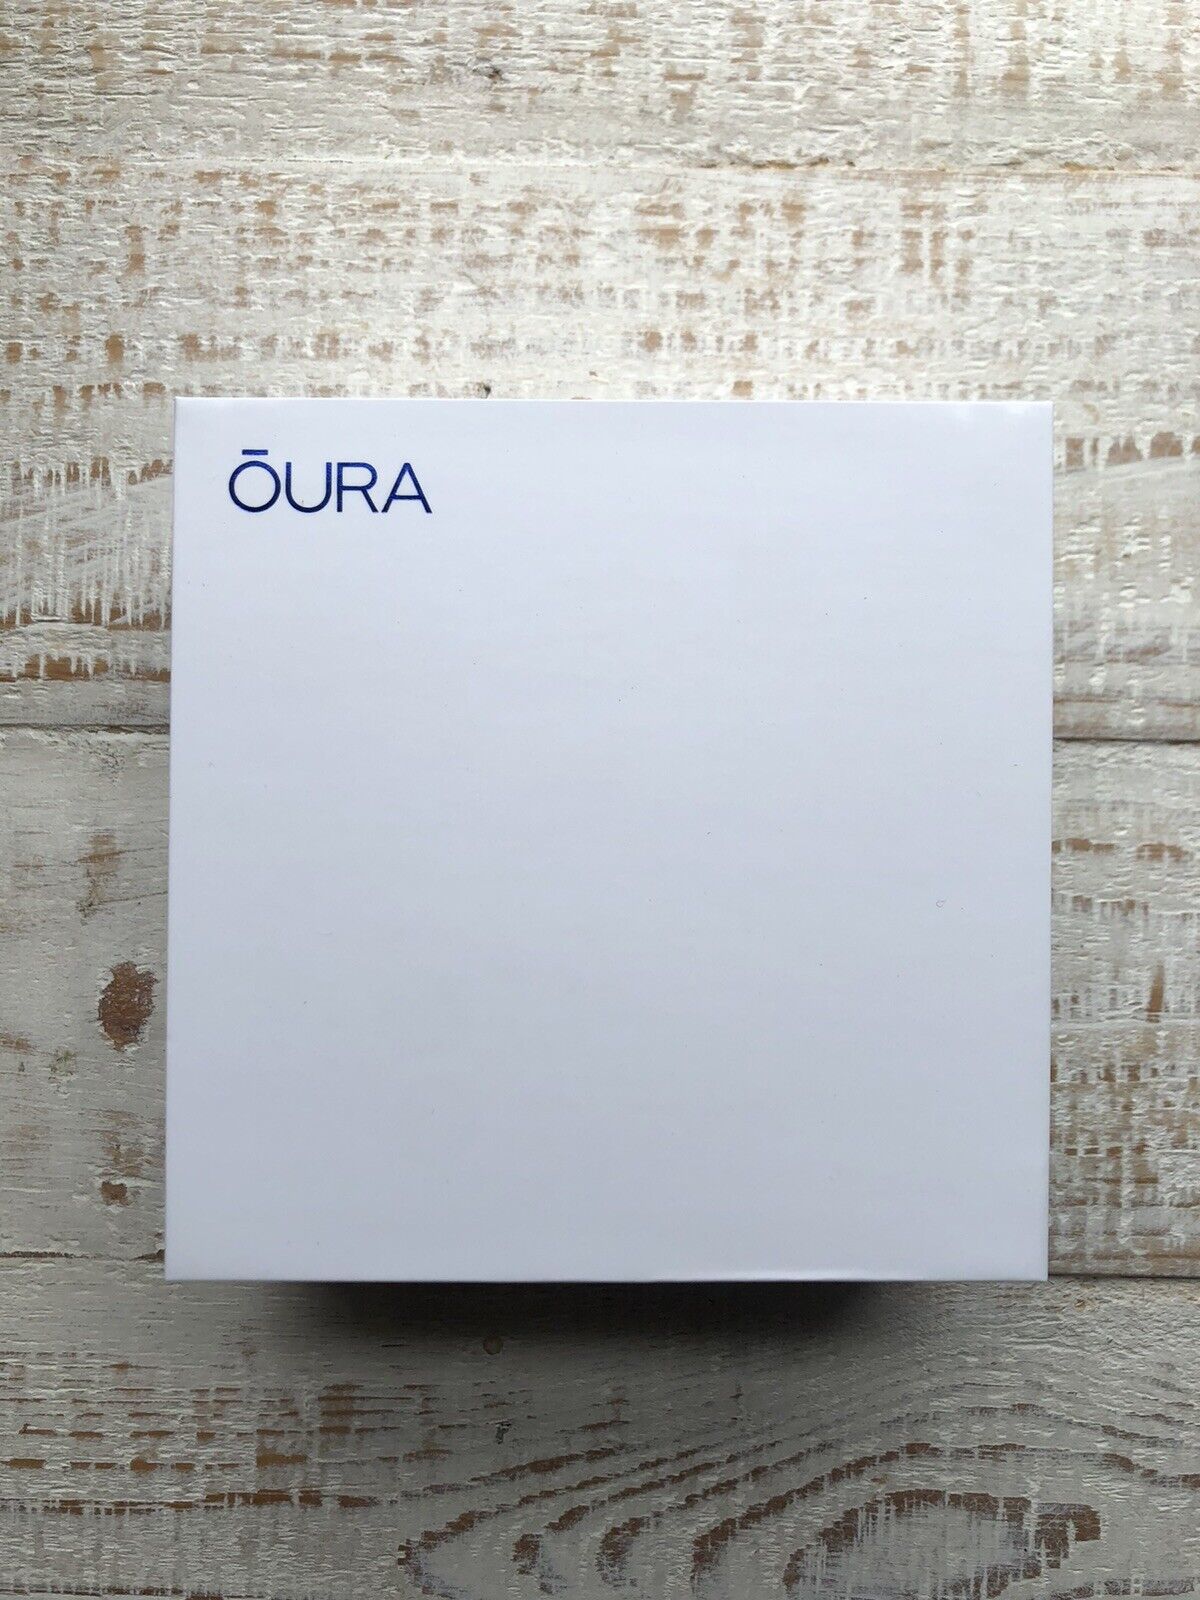 Oura Ring Gen 3 Tracker (Color SILVER) New in Box • Size 10